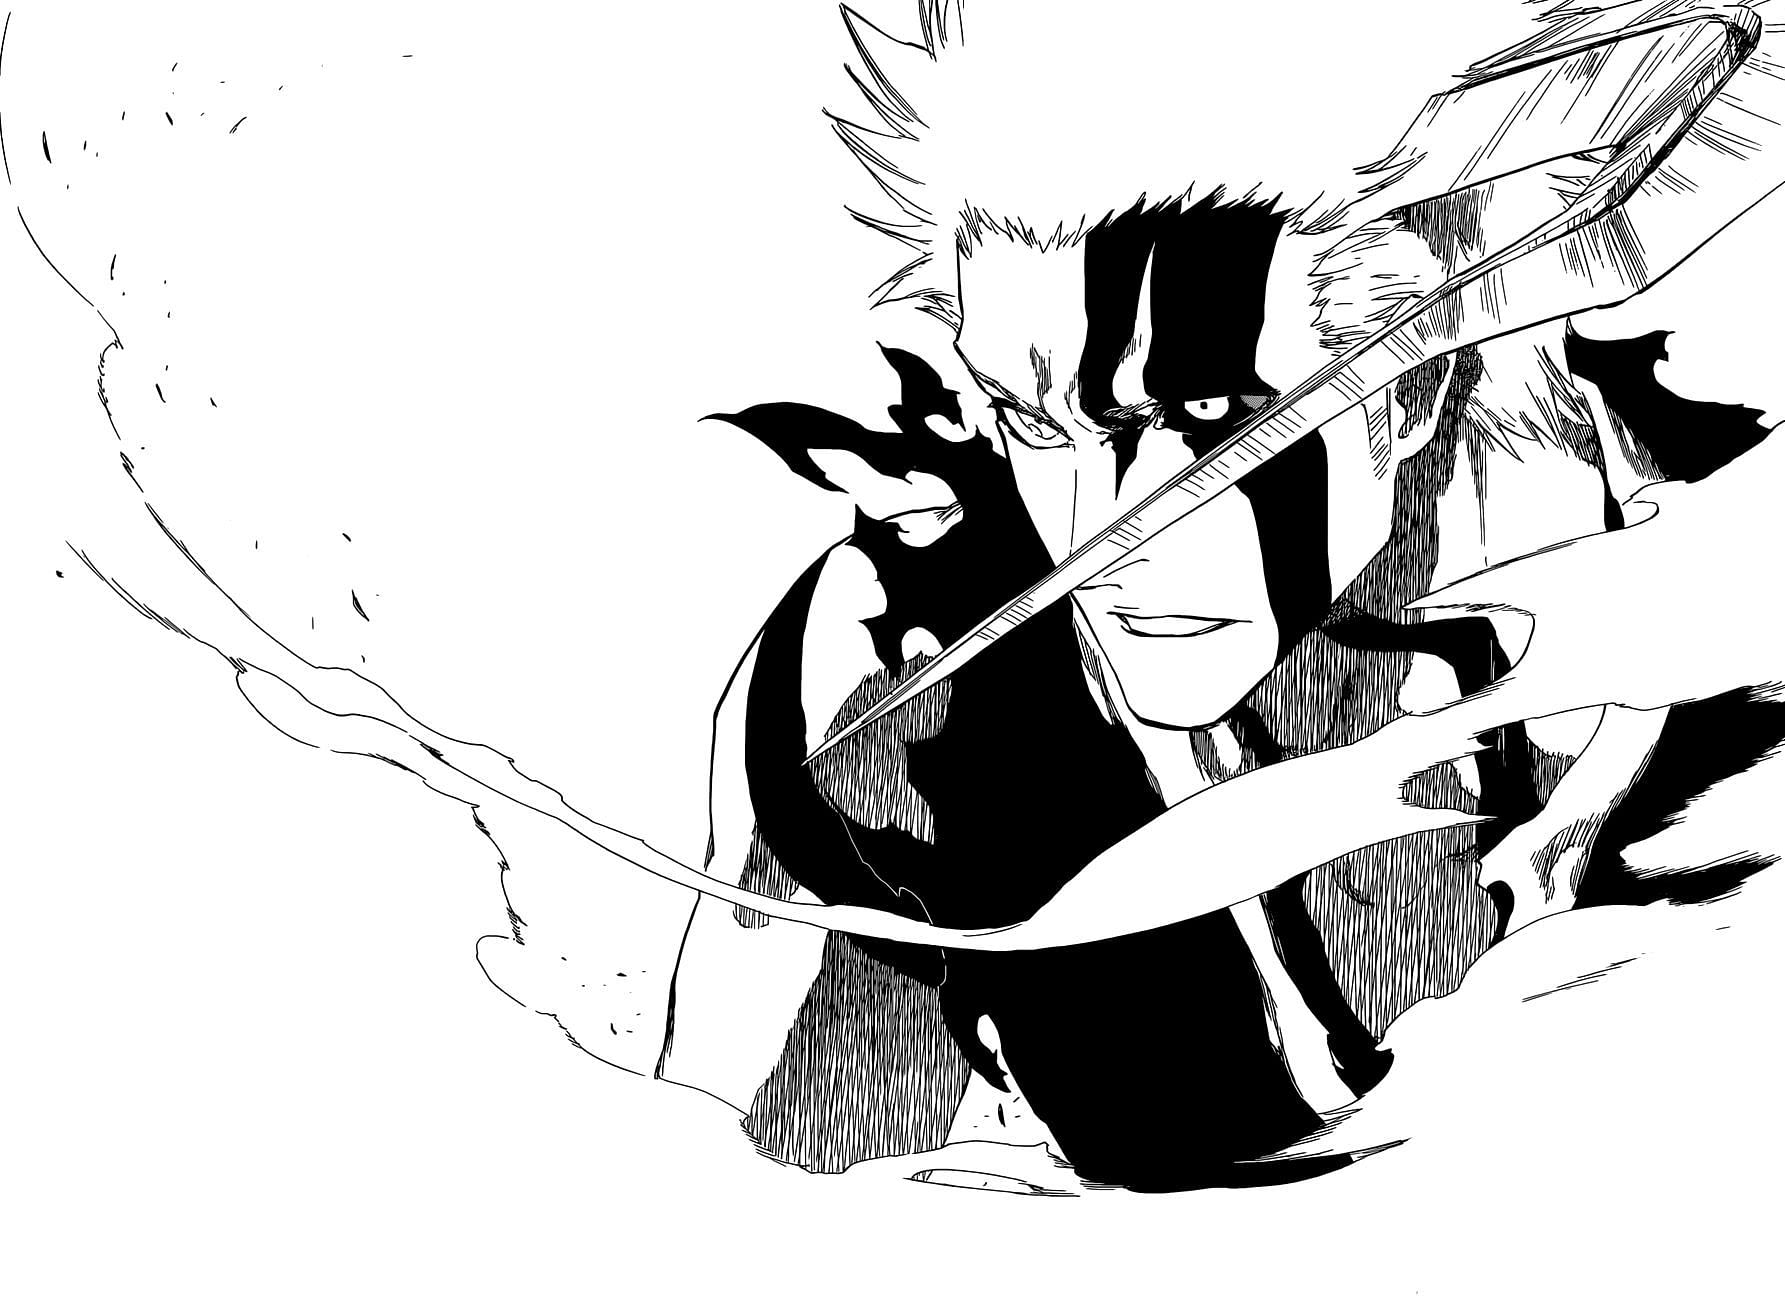 Ichigo&#039;s final form in Bleach, combining the powers of the Vasto Lorde within him, and the Quincy powers he inherited (Image via Shonen JUMP)